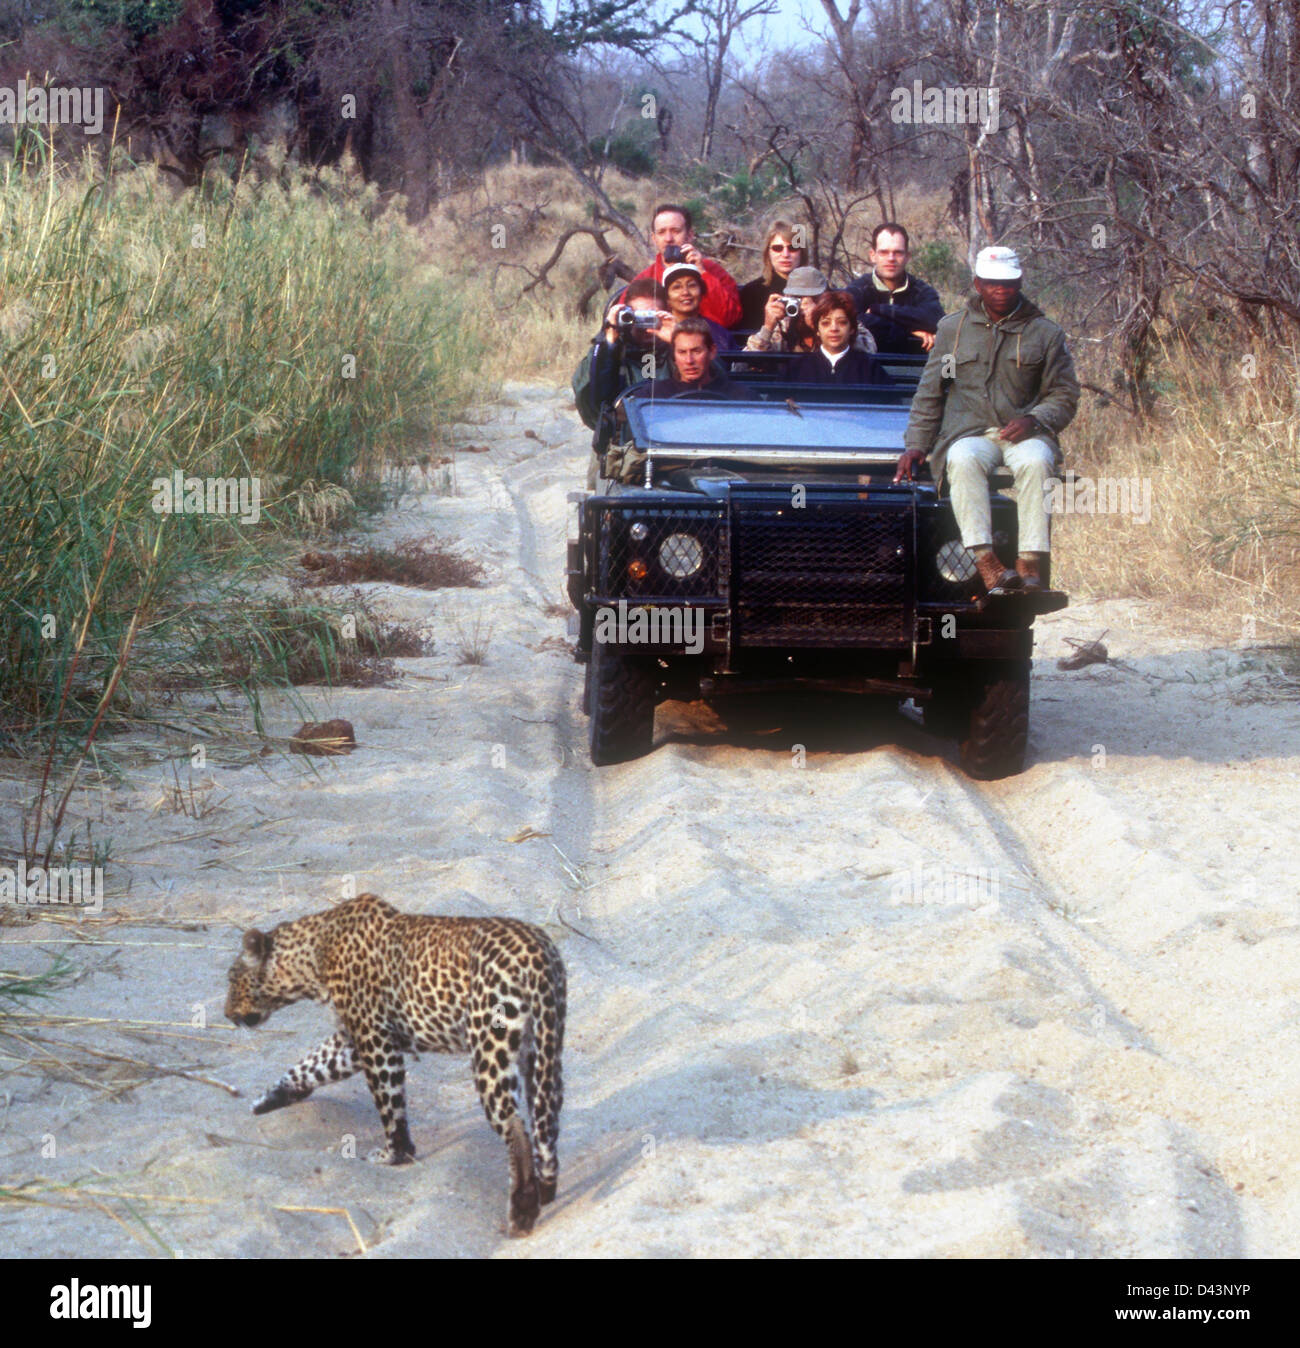 Leopard walking before tourists on safari in a jeep from a lodge in Sabi Sands Game Reserve, Kruger National Park, South Africa Stock Photo